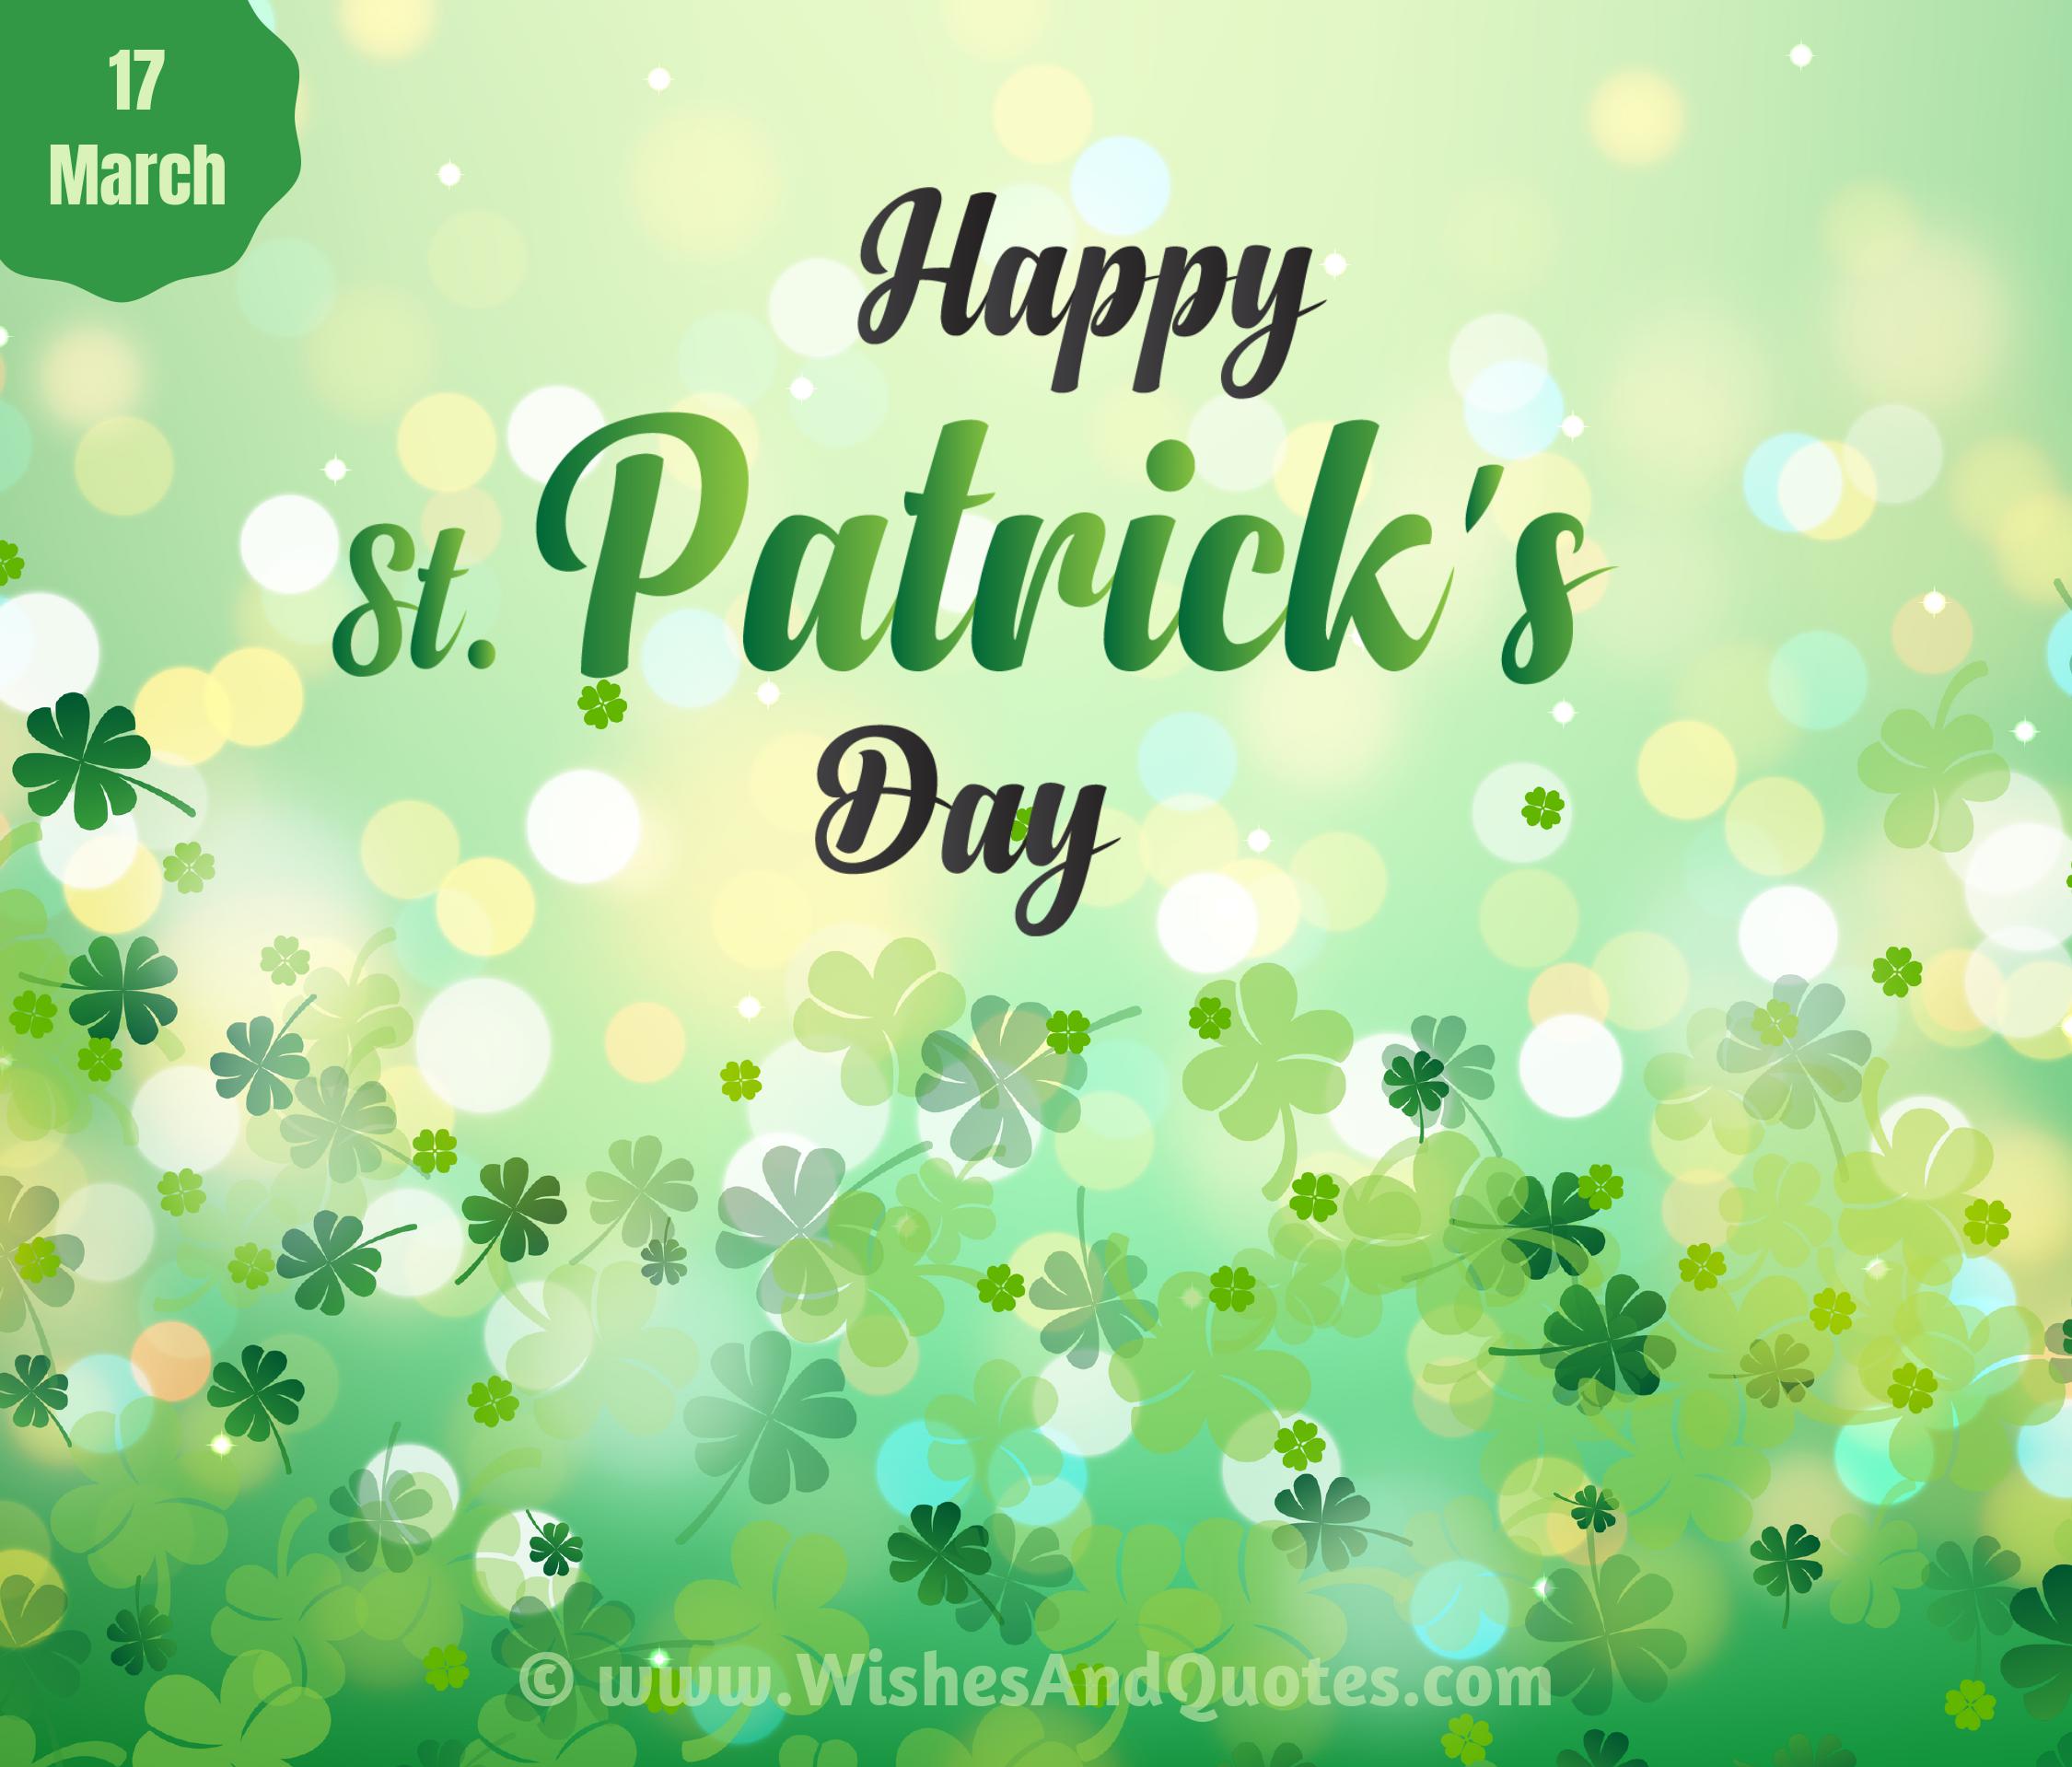 St. Patrick's Day 2023 Wishes & Greetings: Images, Quotes